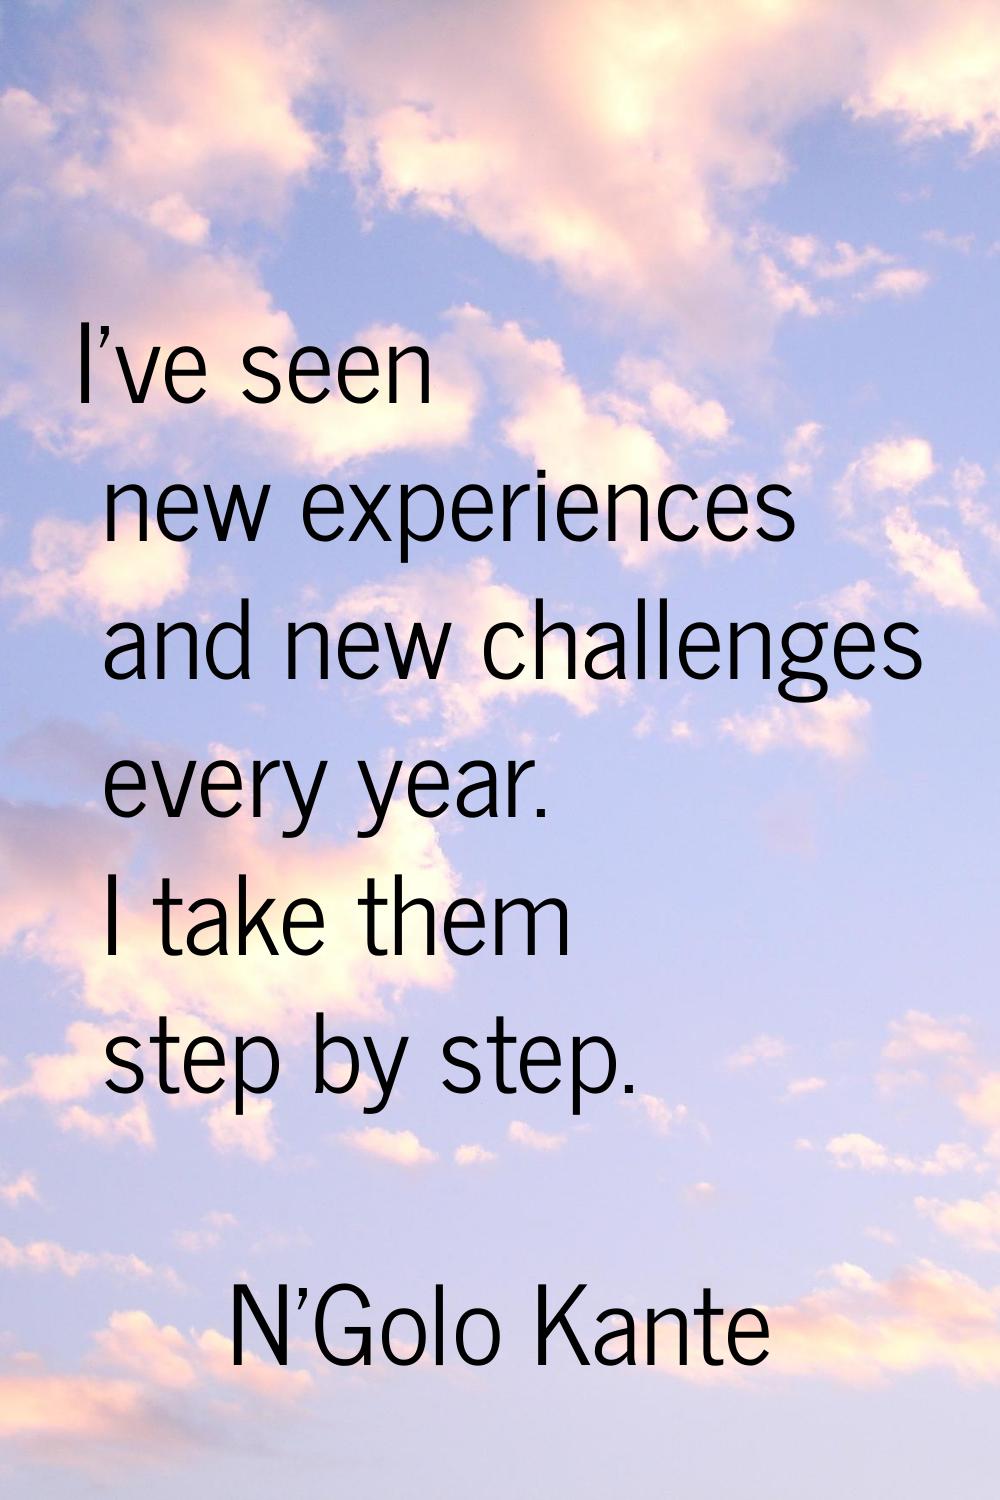 I've seen new experiences and new challenges every year. I take them step by step.